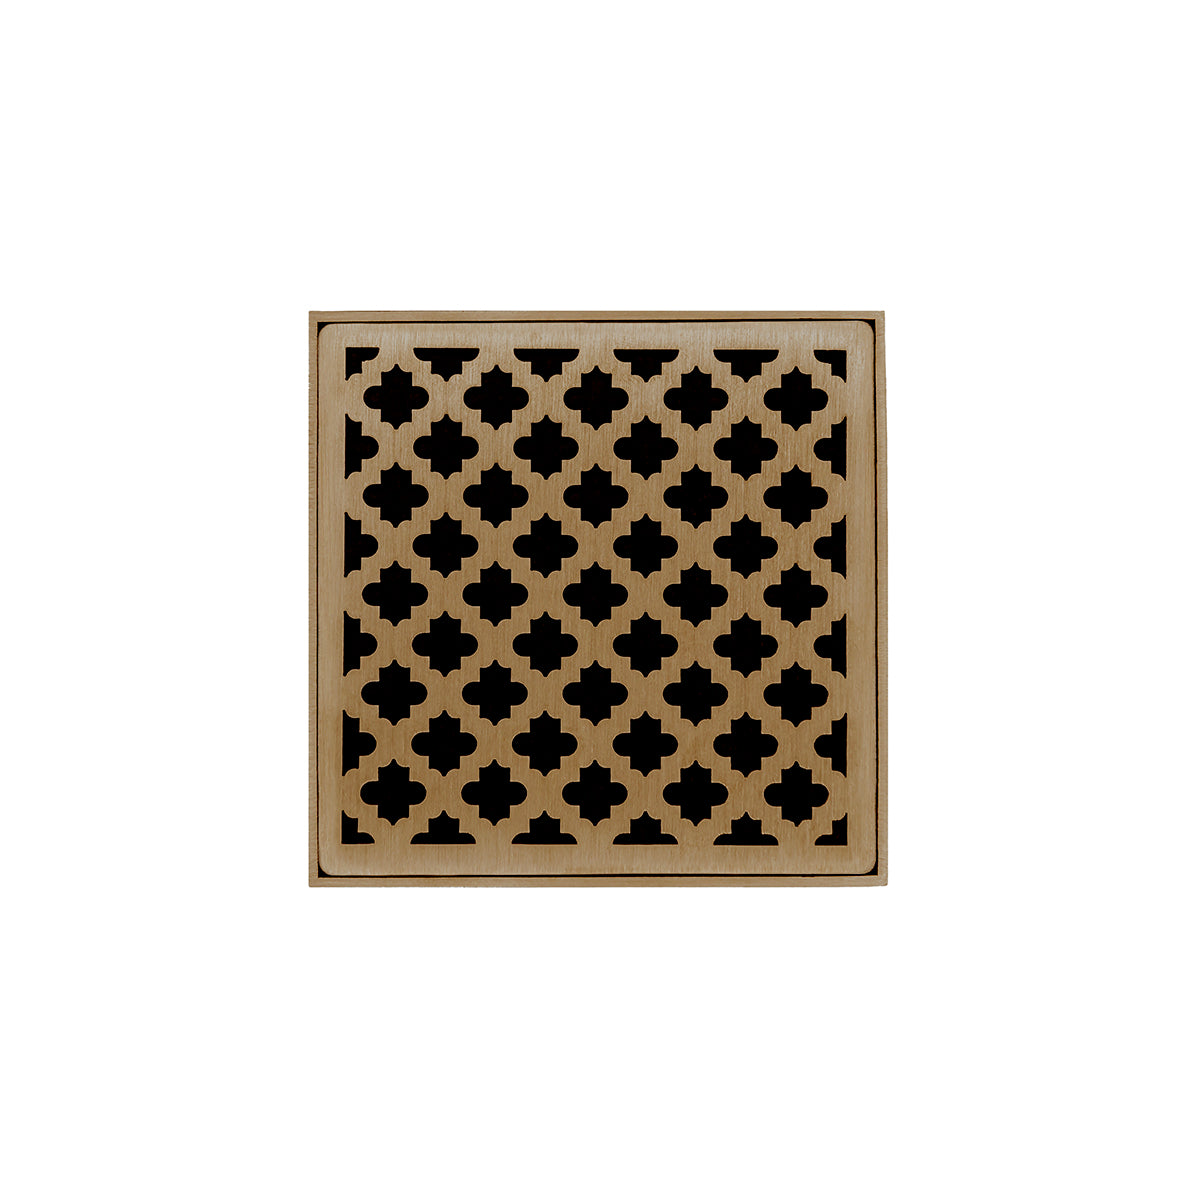 Infinity Drain 4" x 4" MD 4 Premium Center Drain Kit with Moor Pattern Decorative Plate with Cast Iron Drain Body, 2" Outlet